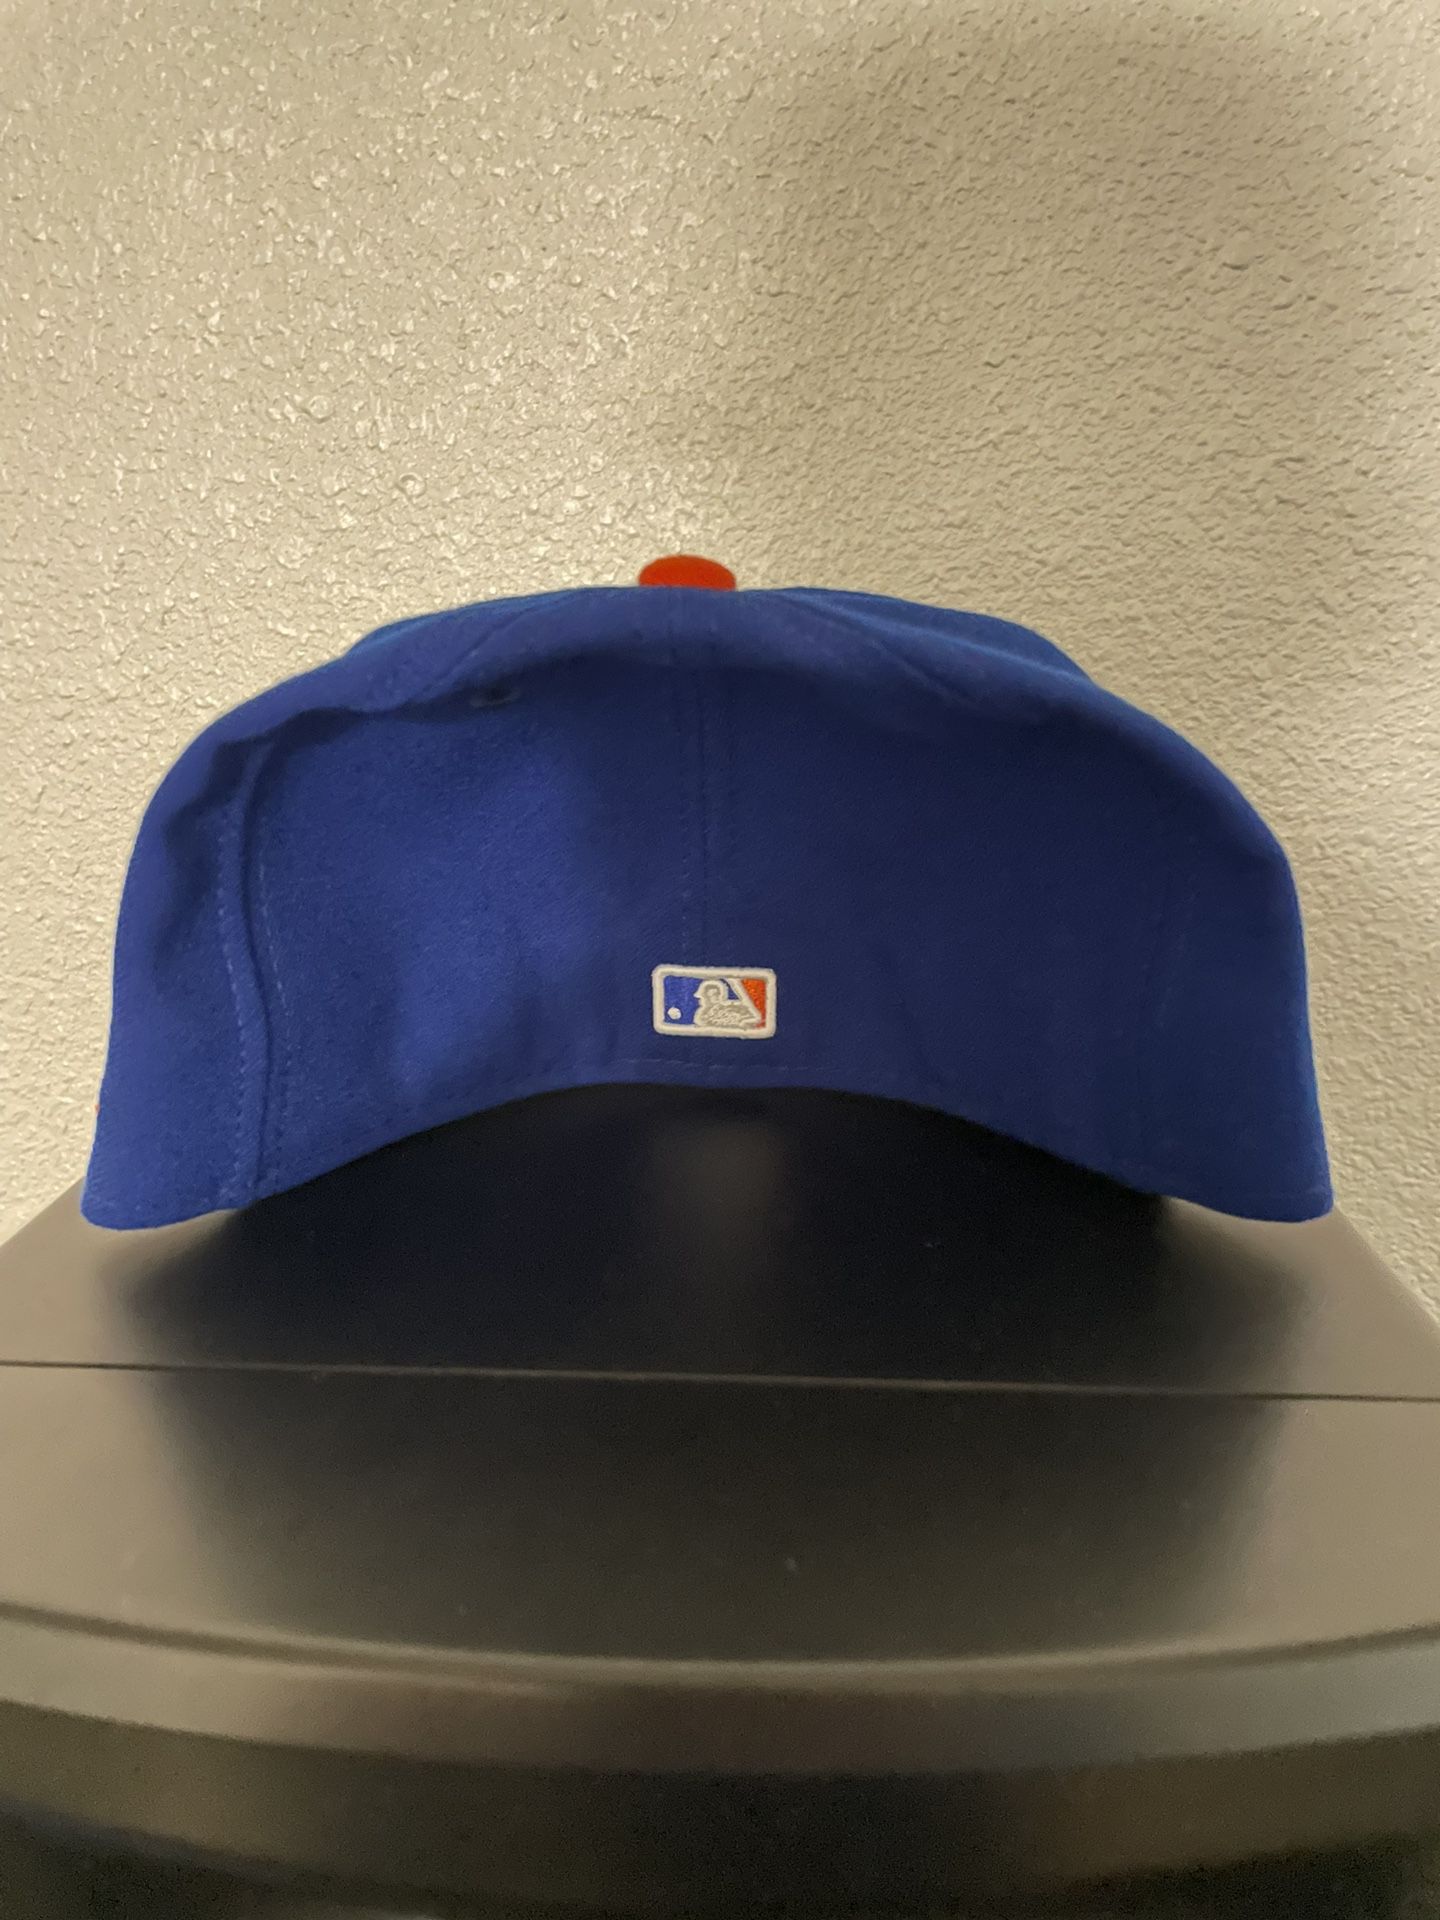 New York Mets New Era fitted hat size 7 3/8